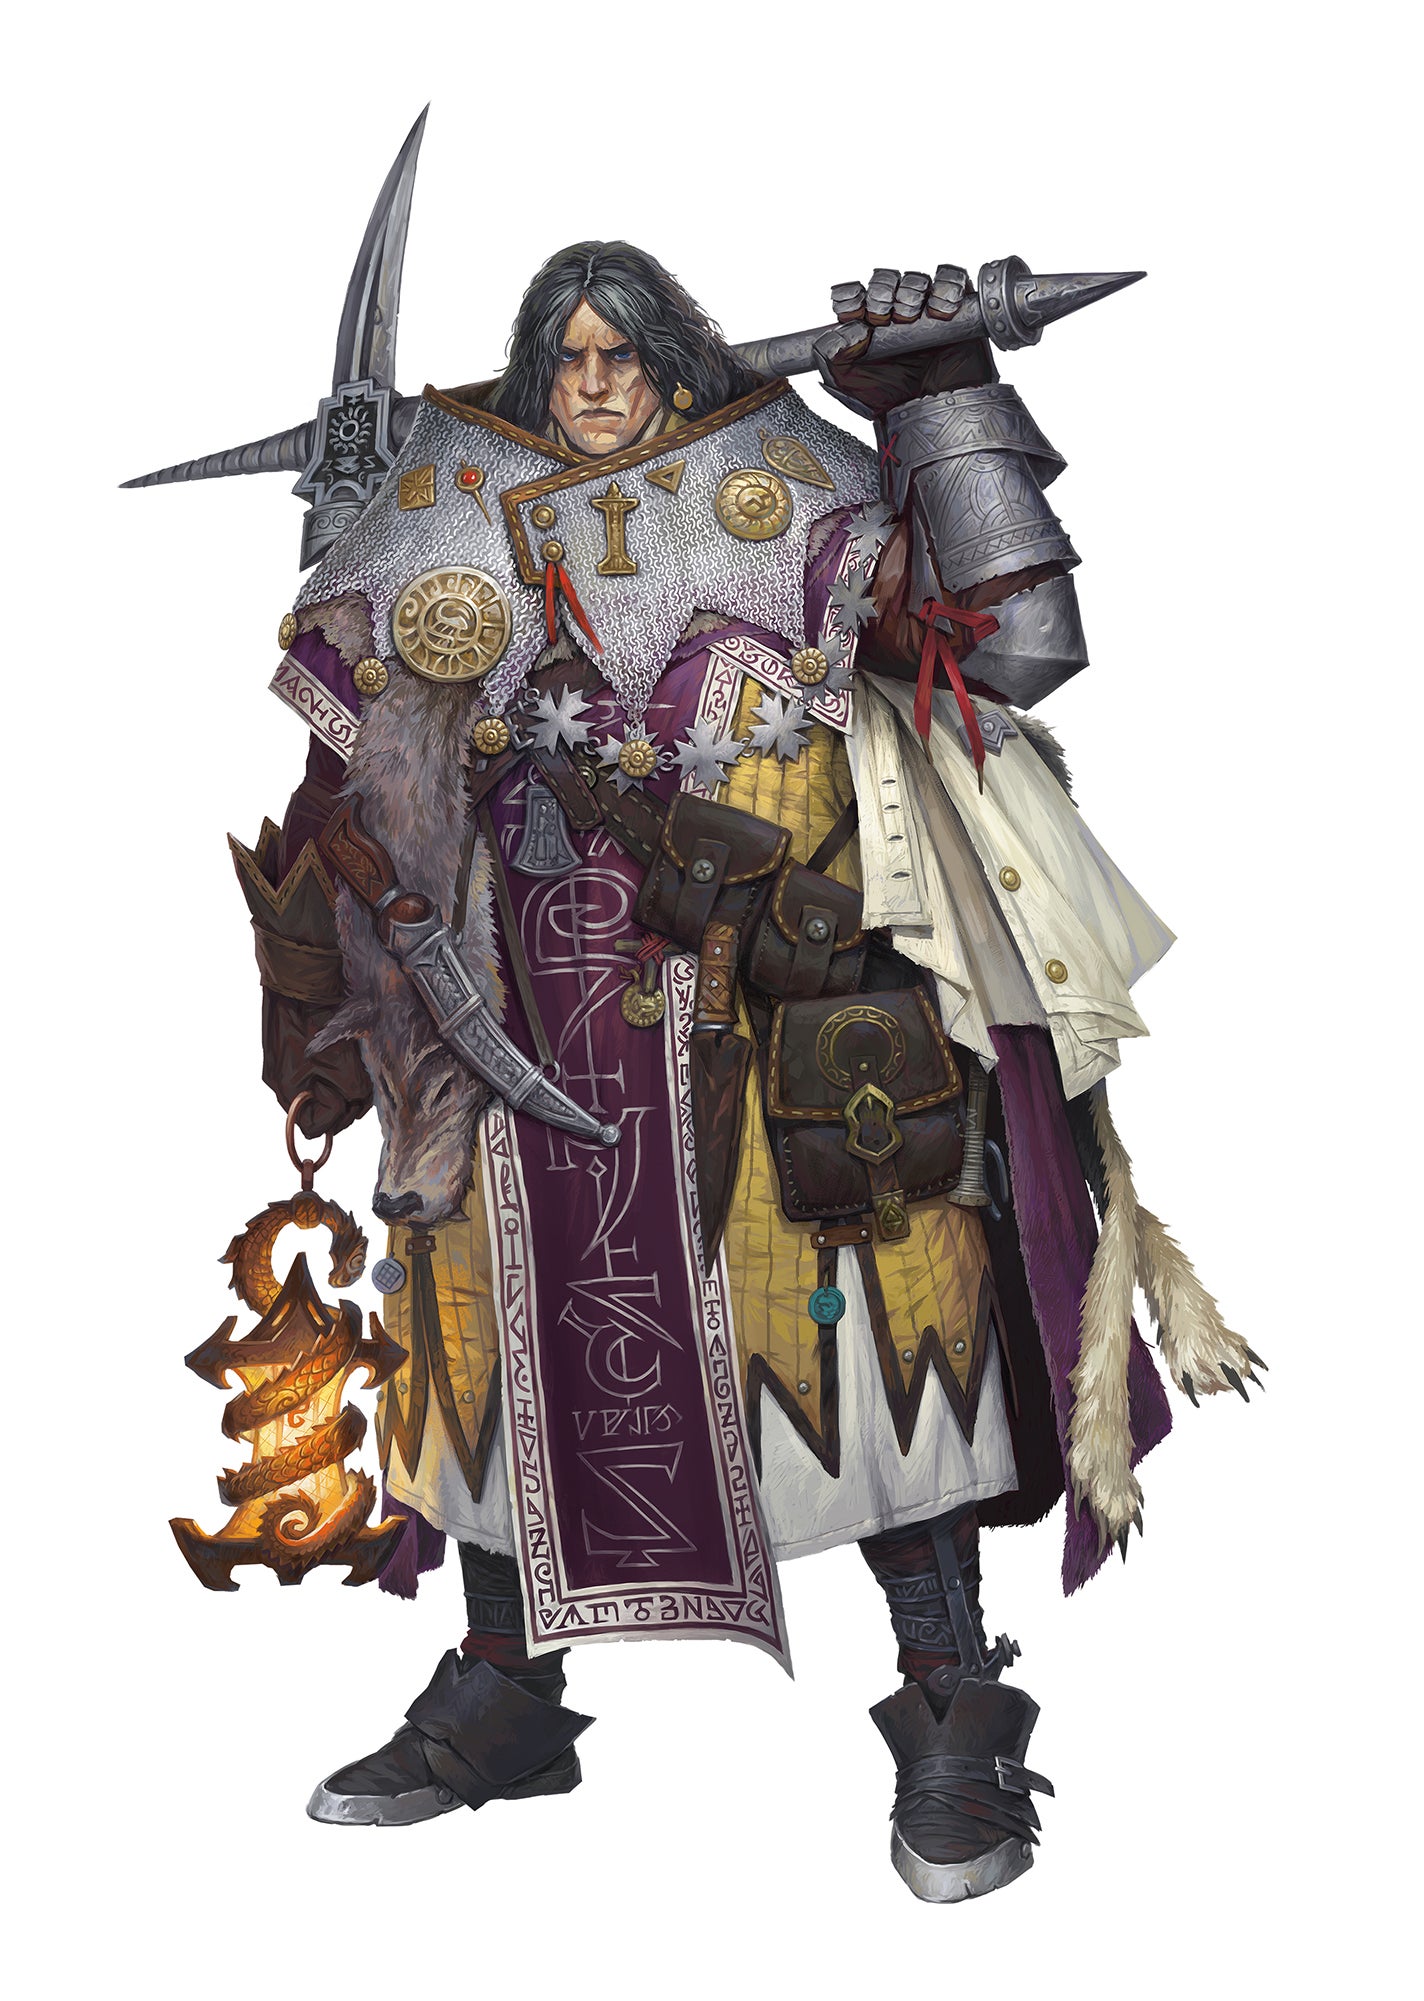 Art by Denis Zhbankov. Mios, the iconic thaumaturge. Dressed is a large jacket covered in charms and talismans, holding a lantern and large axe